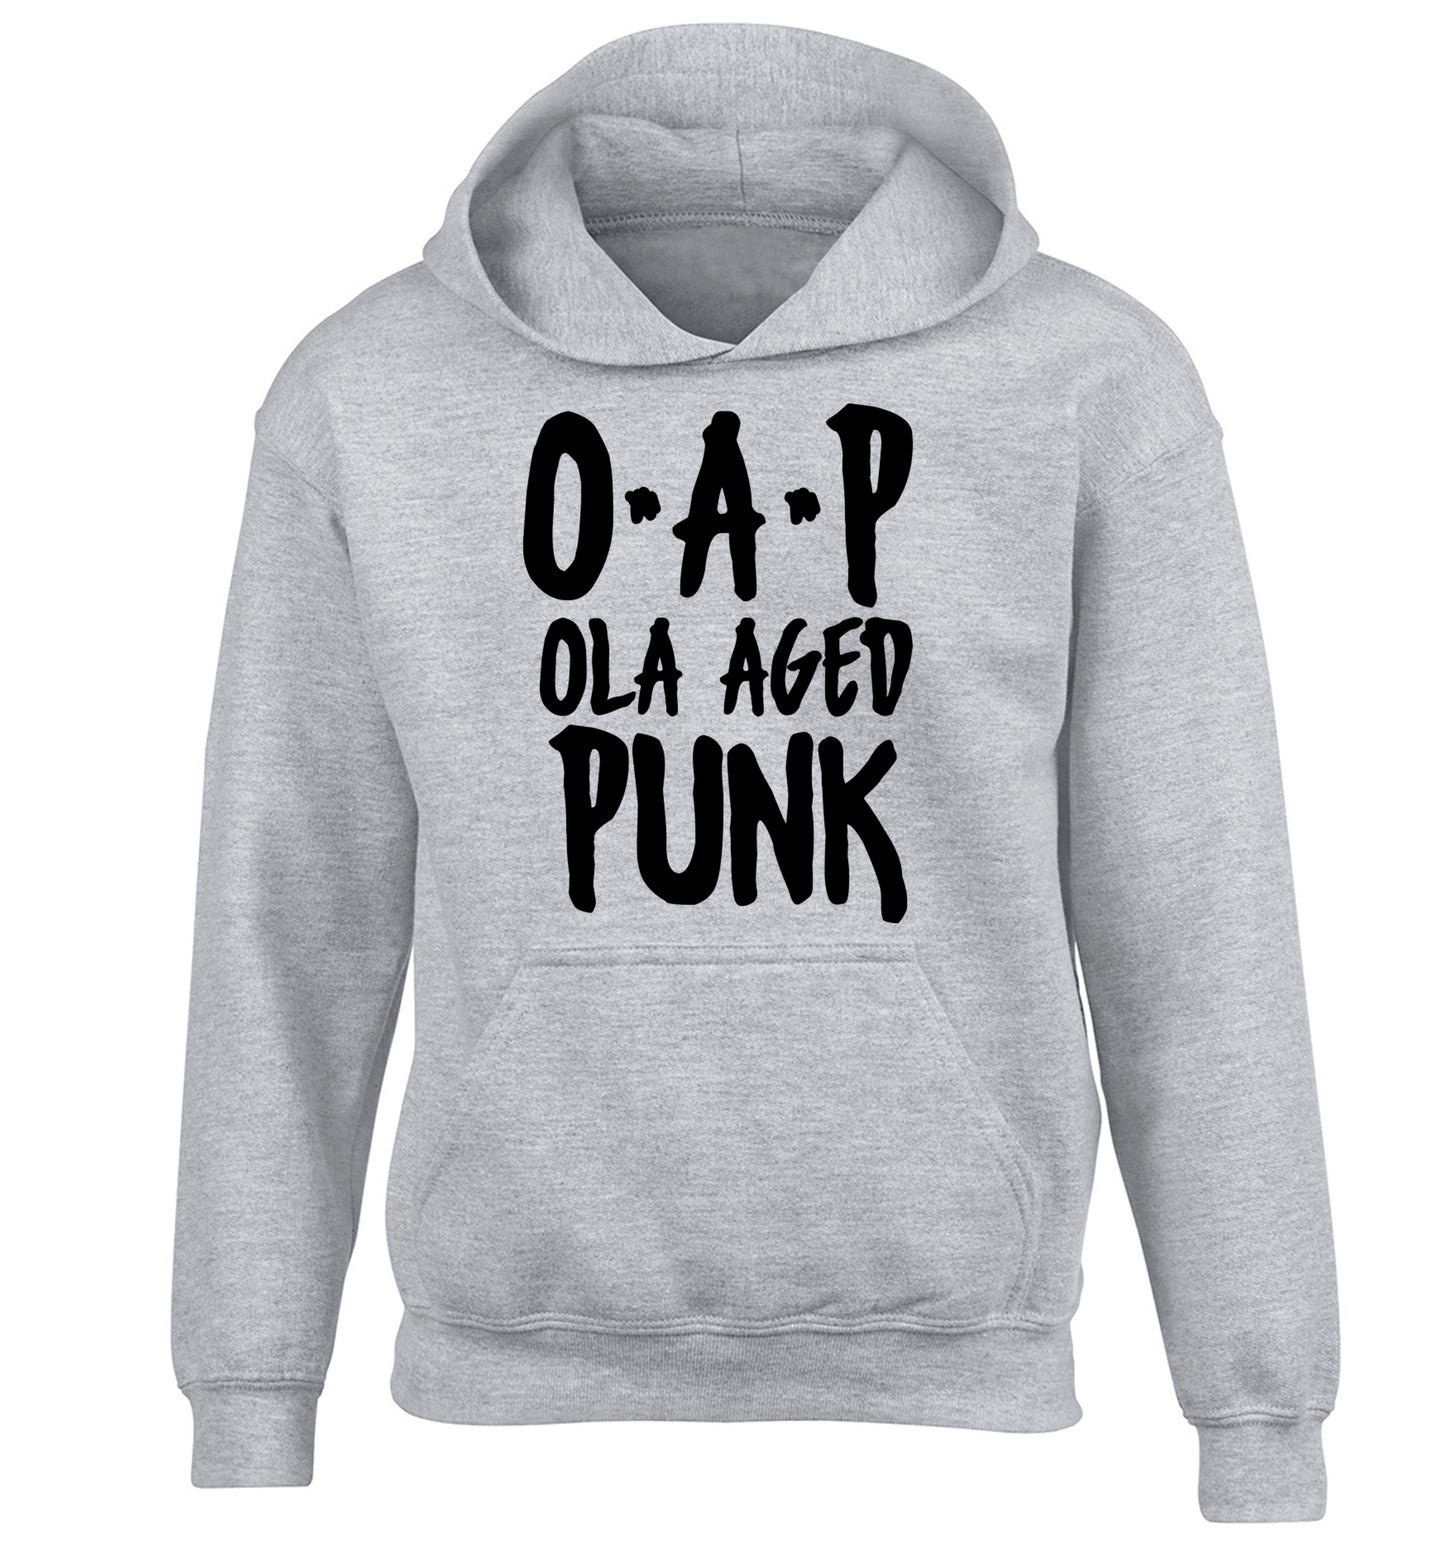 O.A.P Old Aged Punk children's grey hoodie 12-13 Years